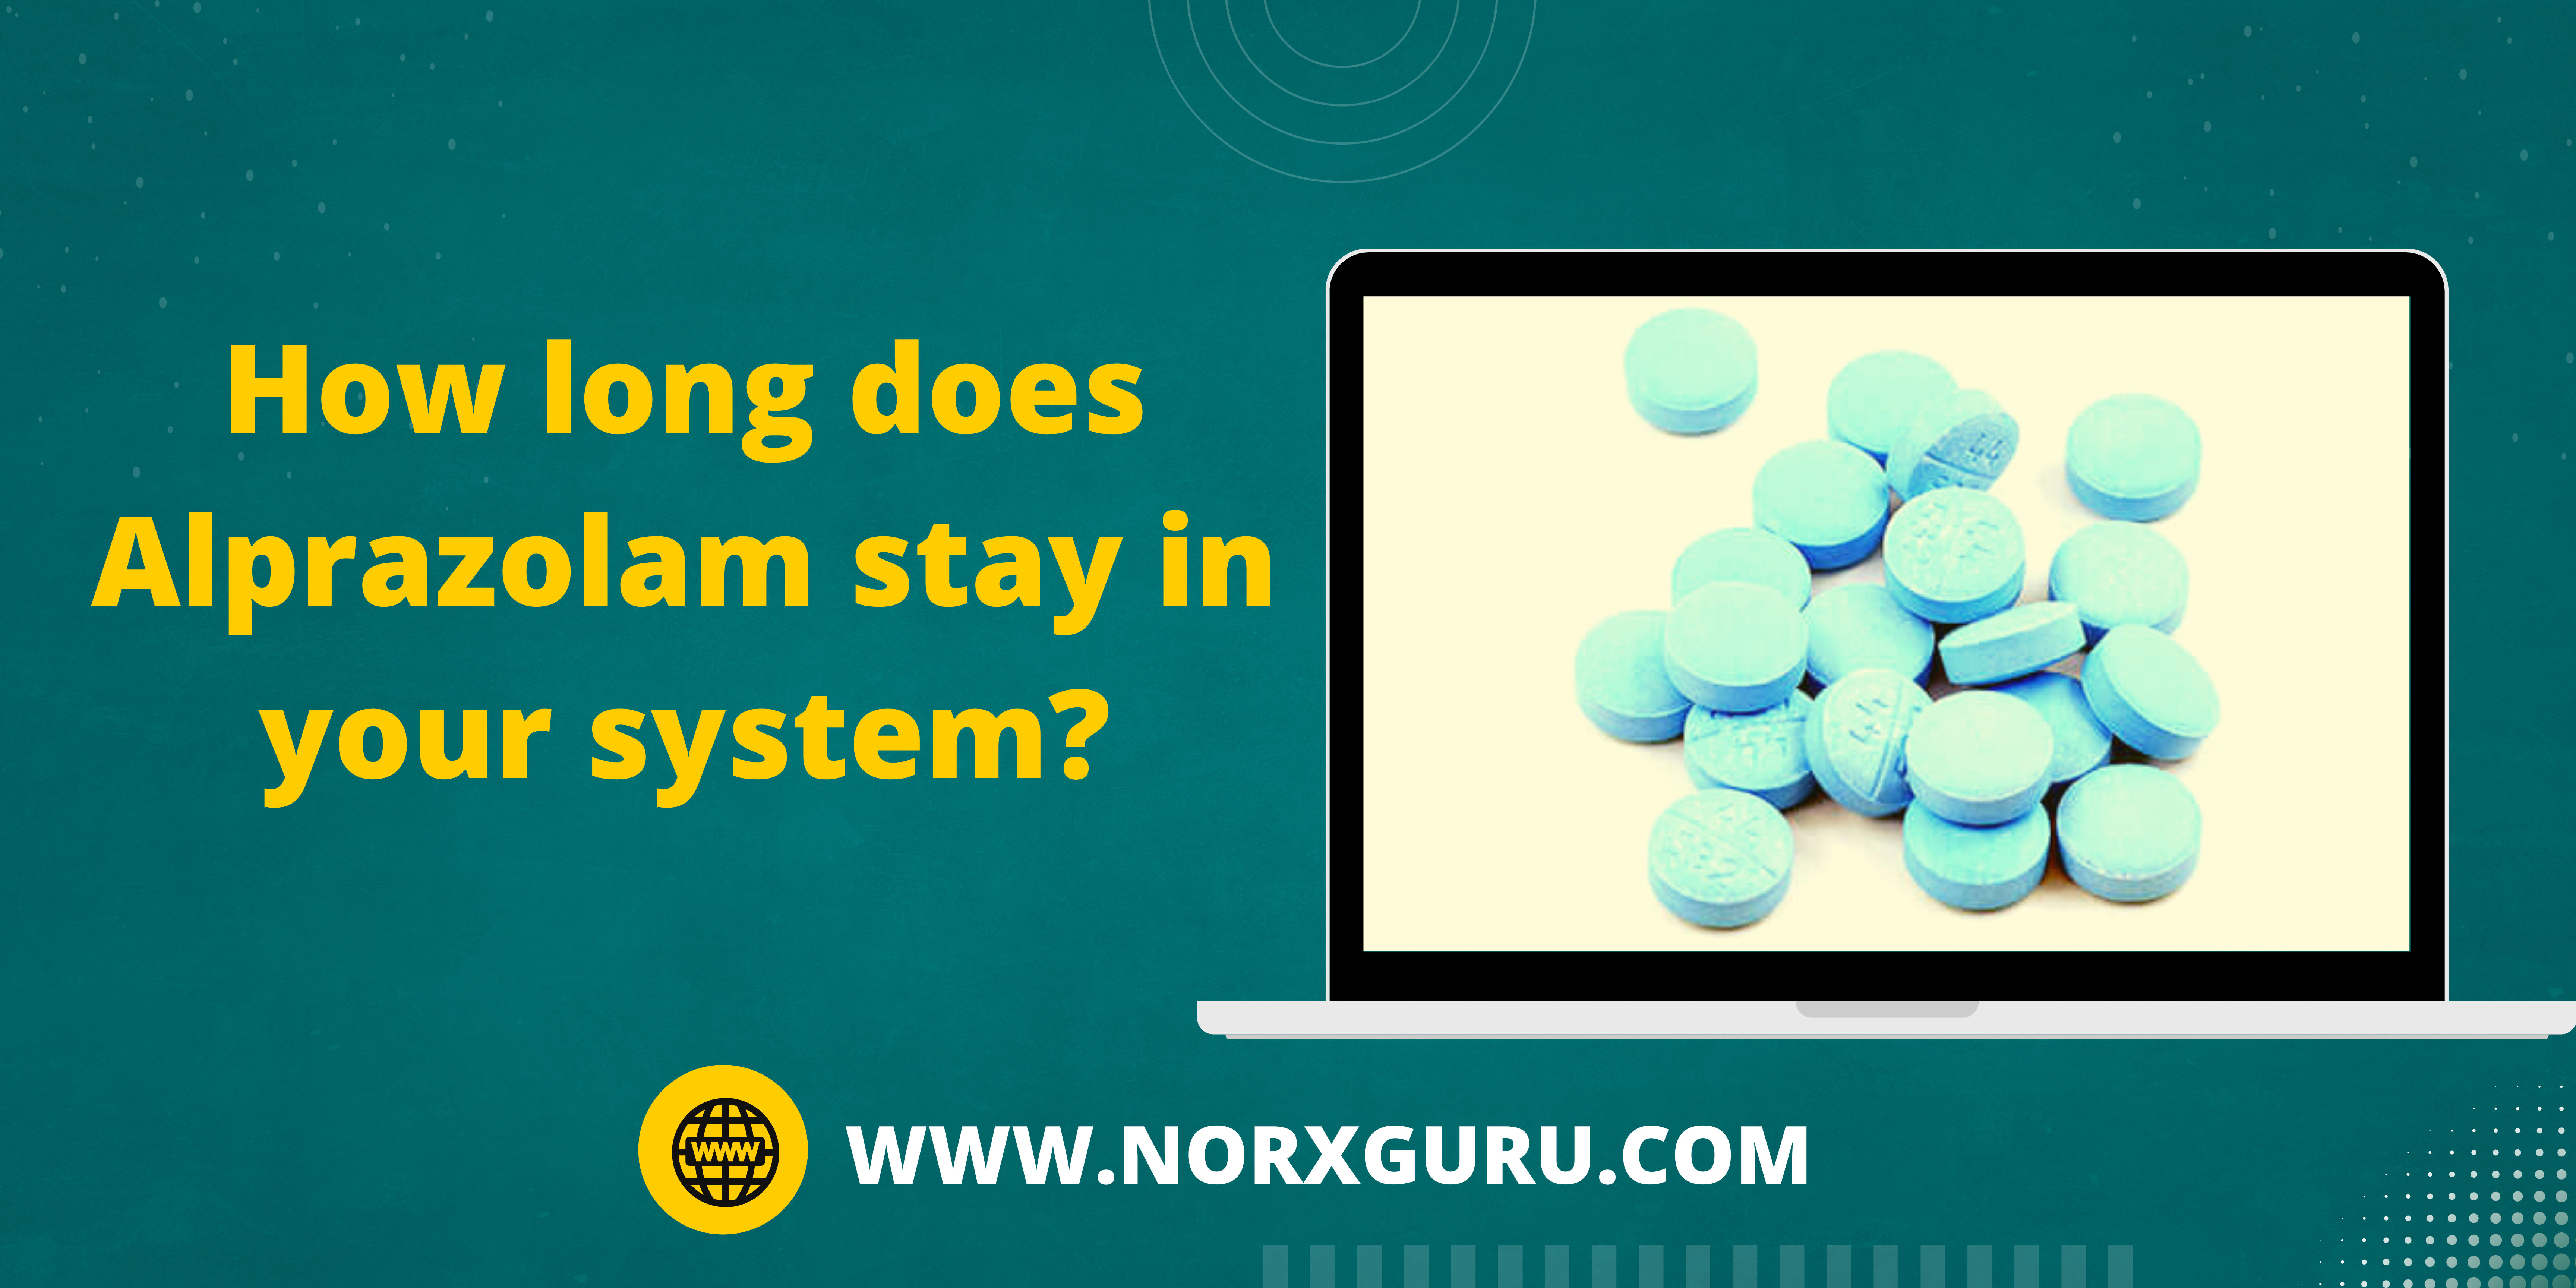 How long does Alprazolam stay in your system?